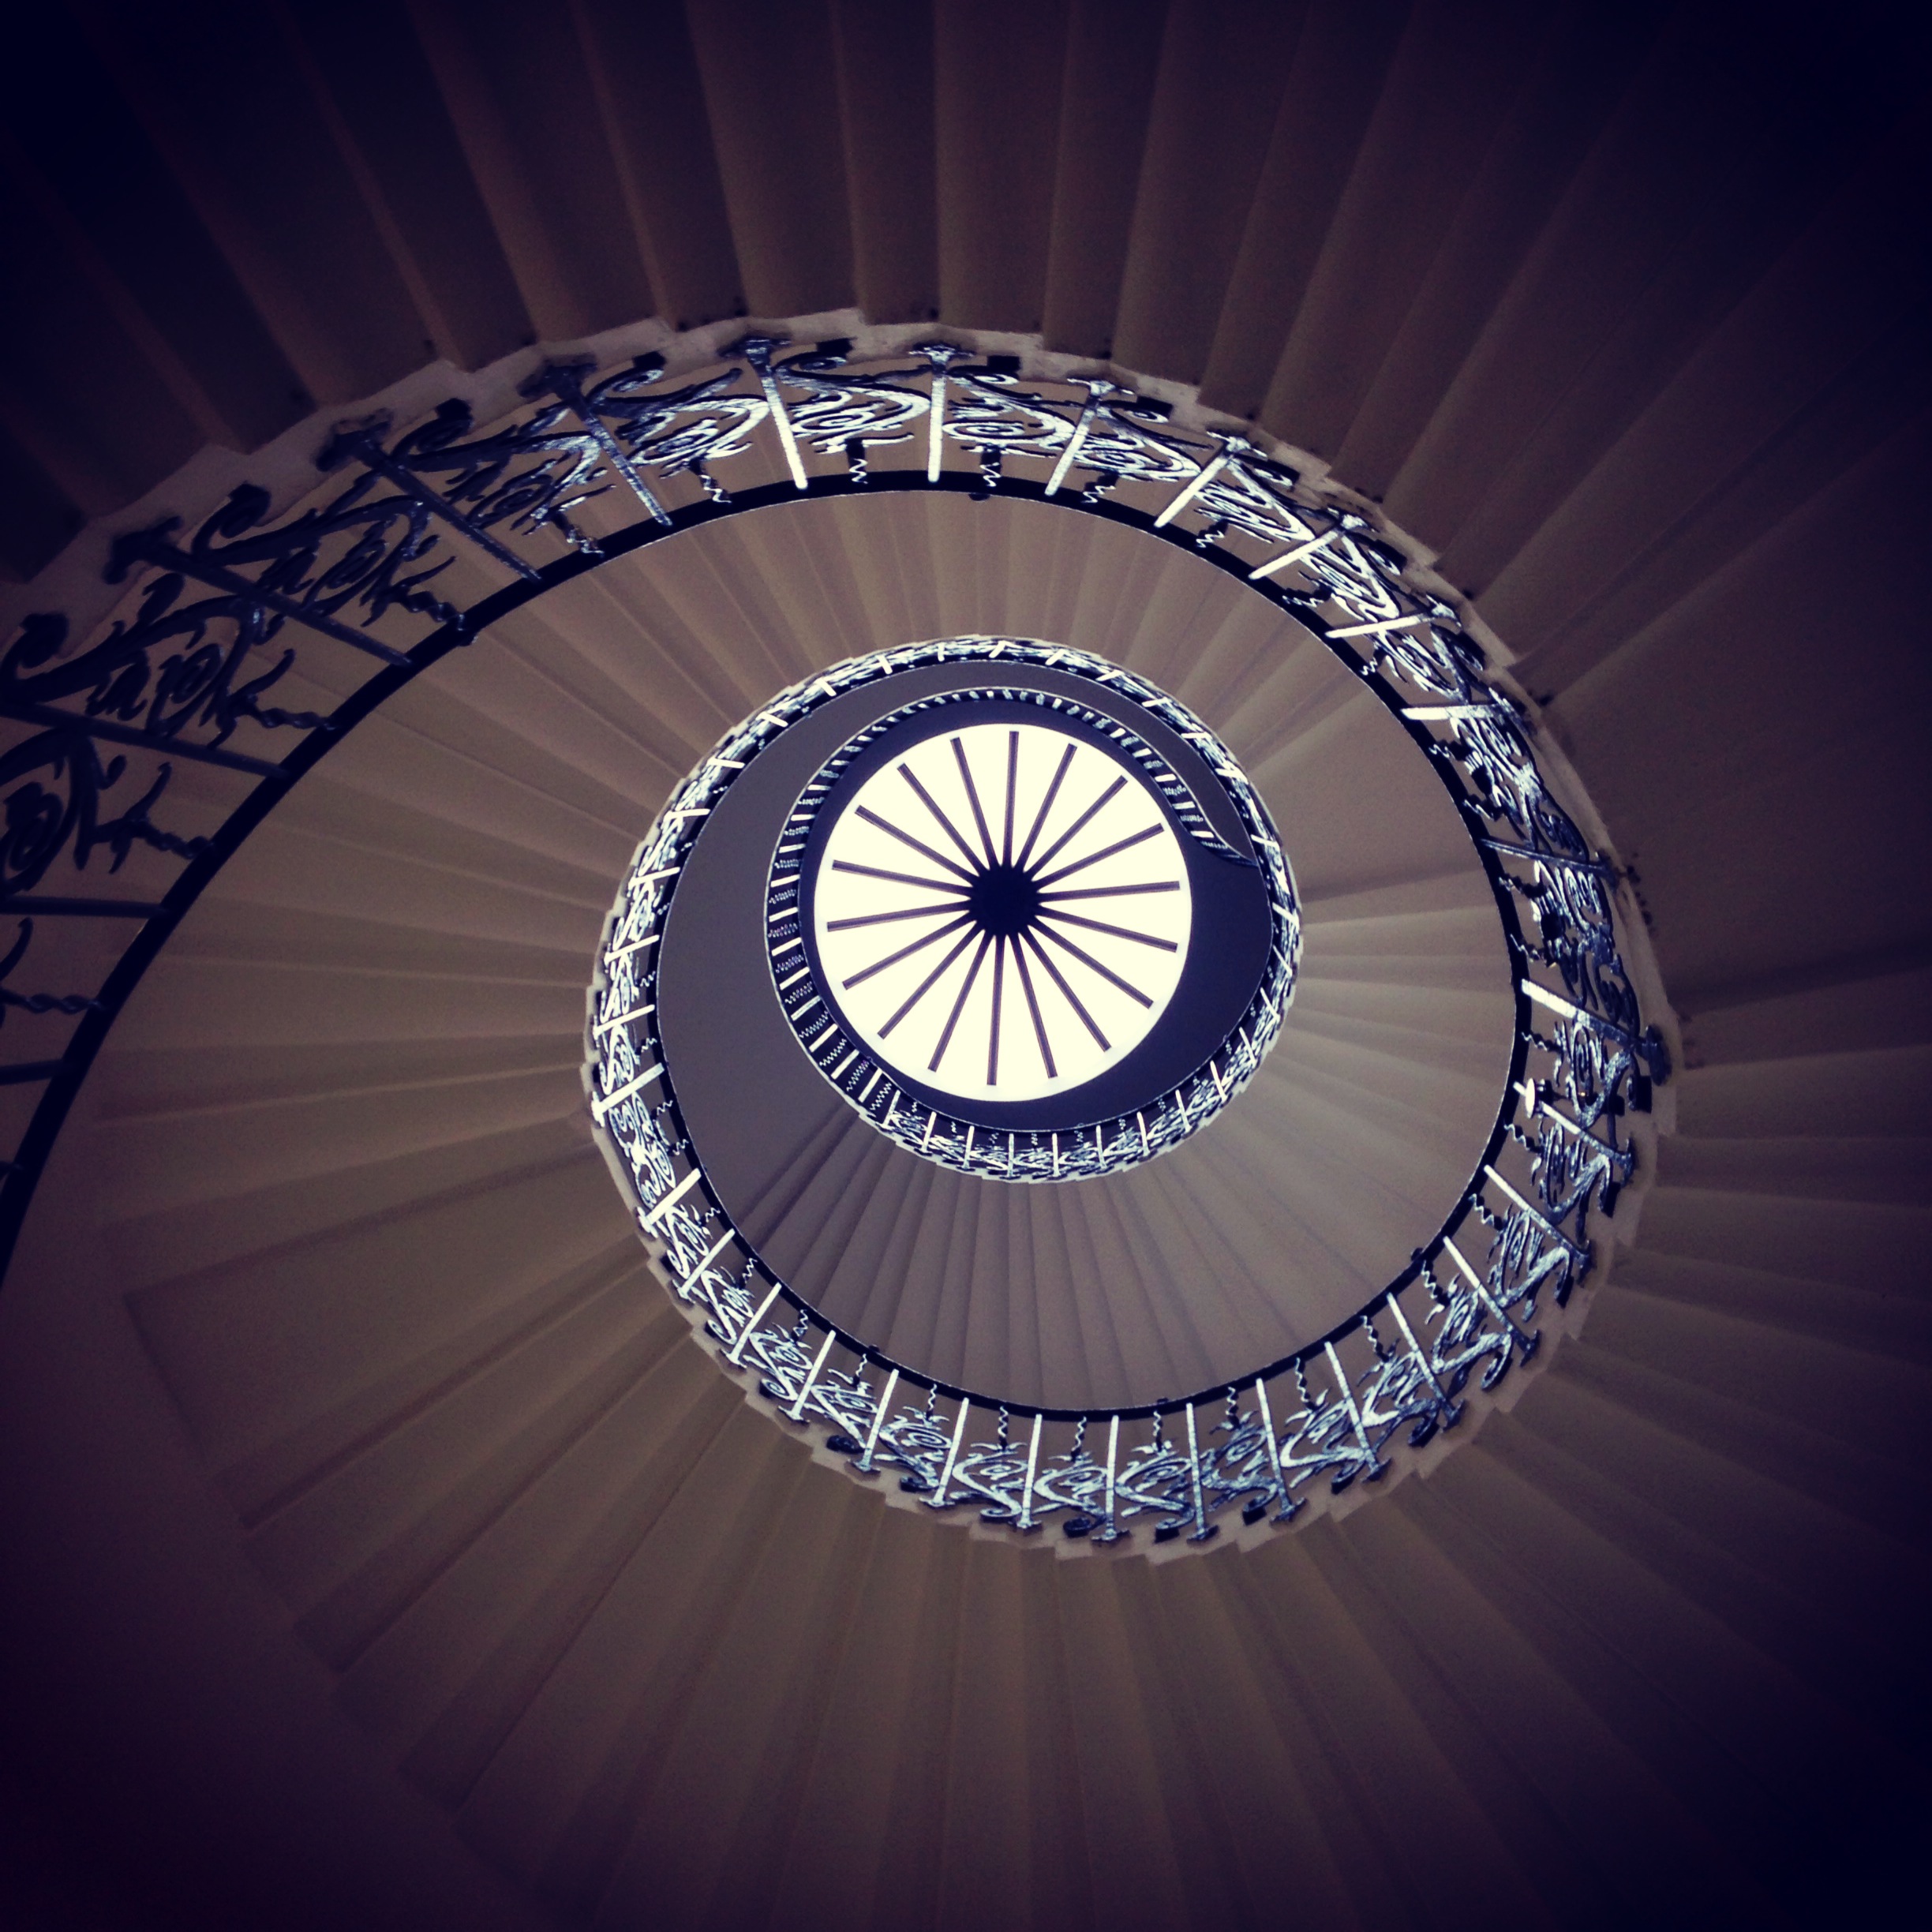 "Stairway to heaven #100happydays 21/100 at Greenwich Queen's House"